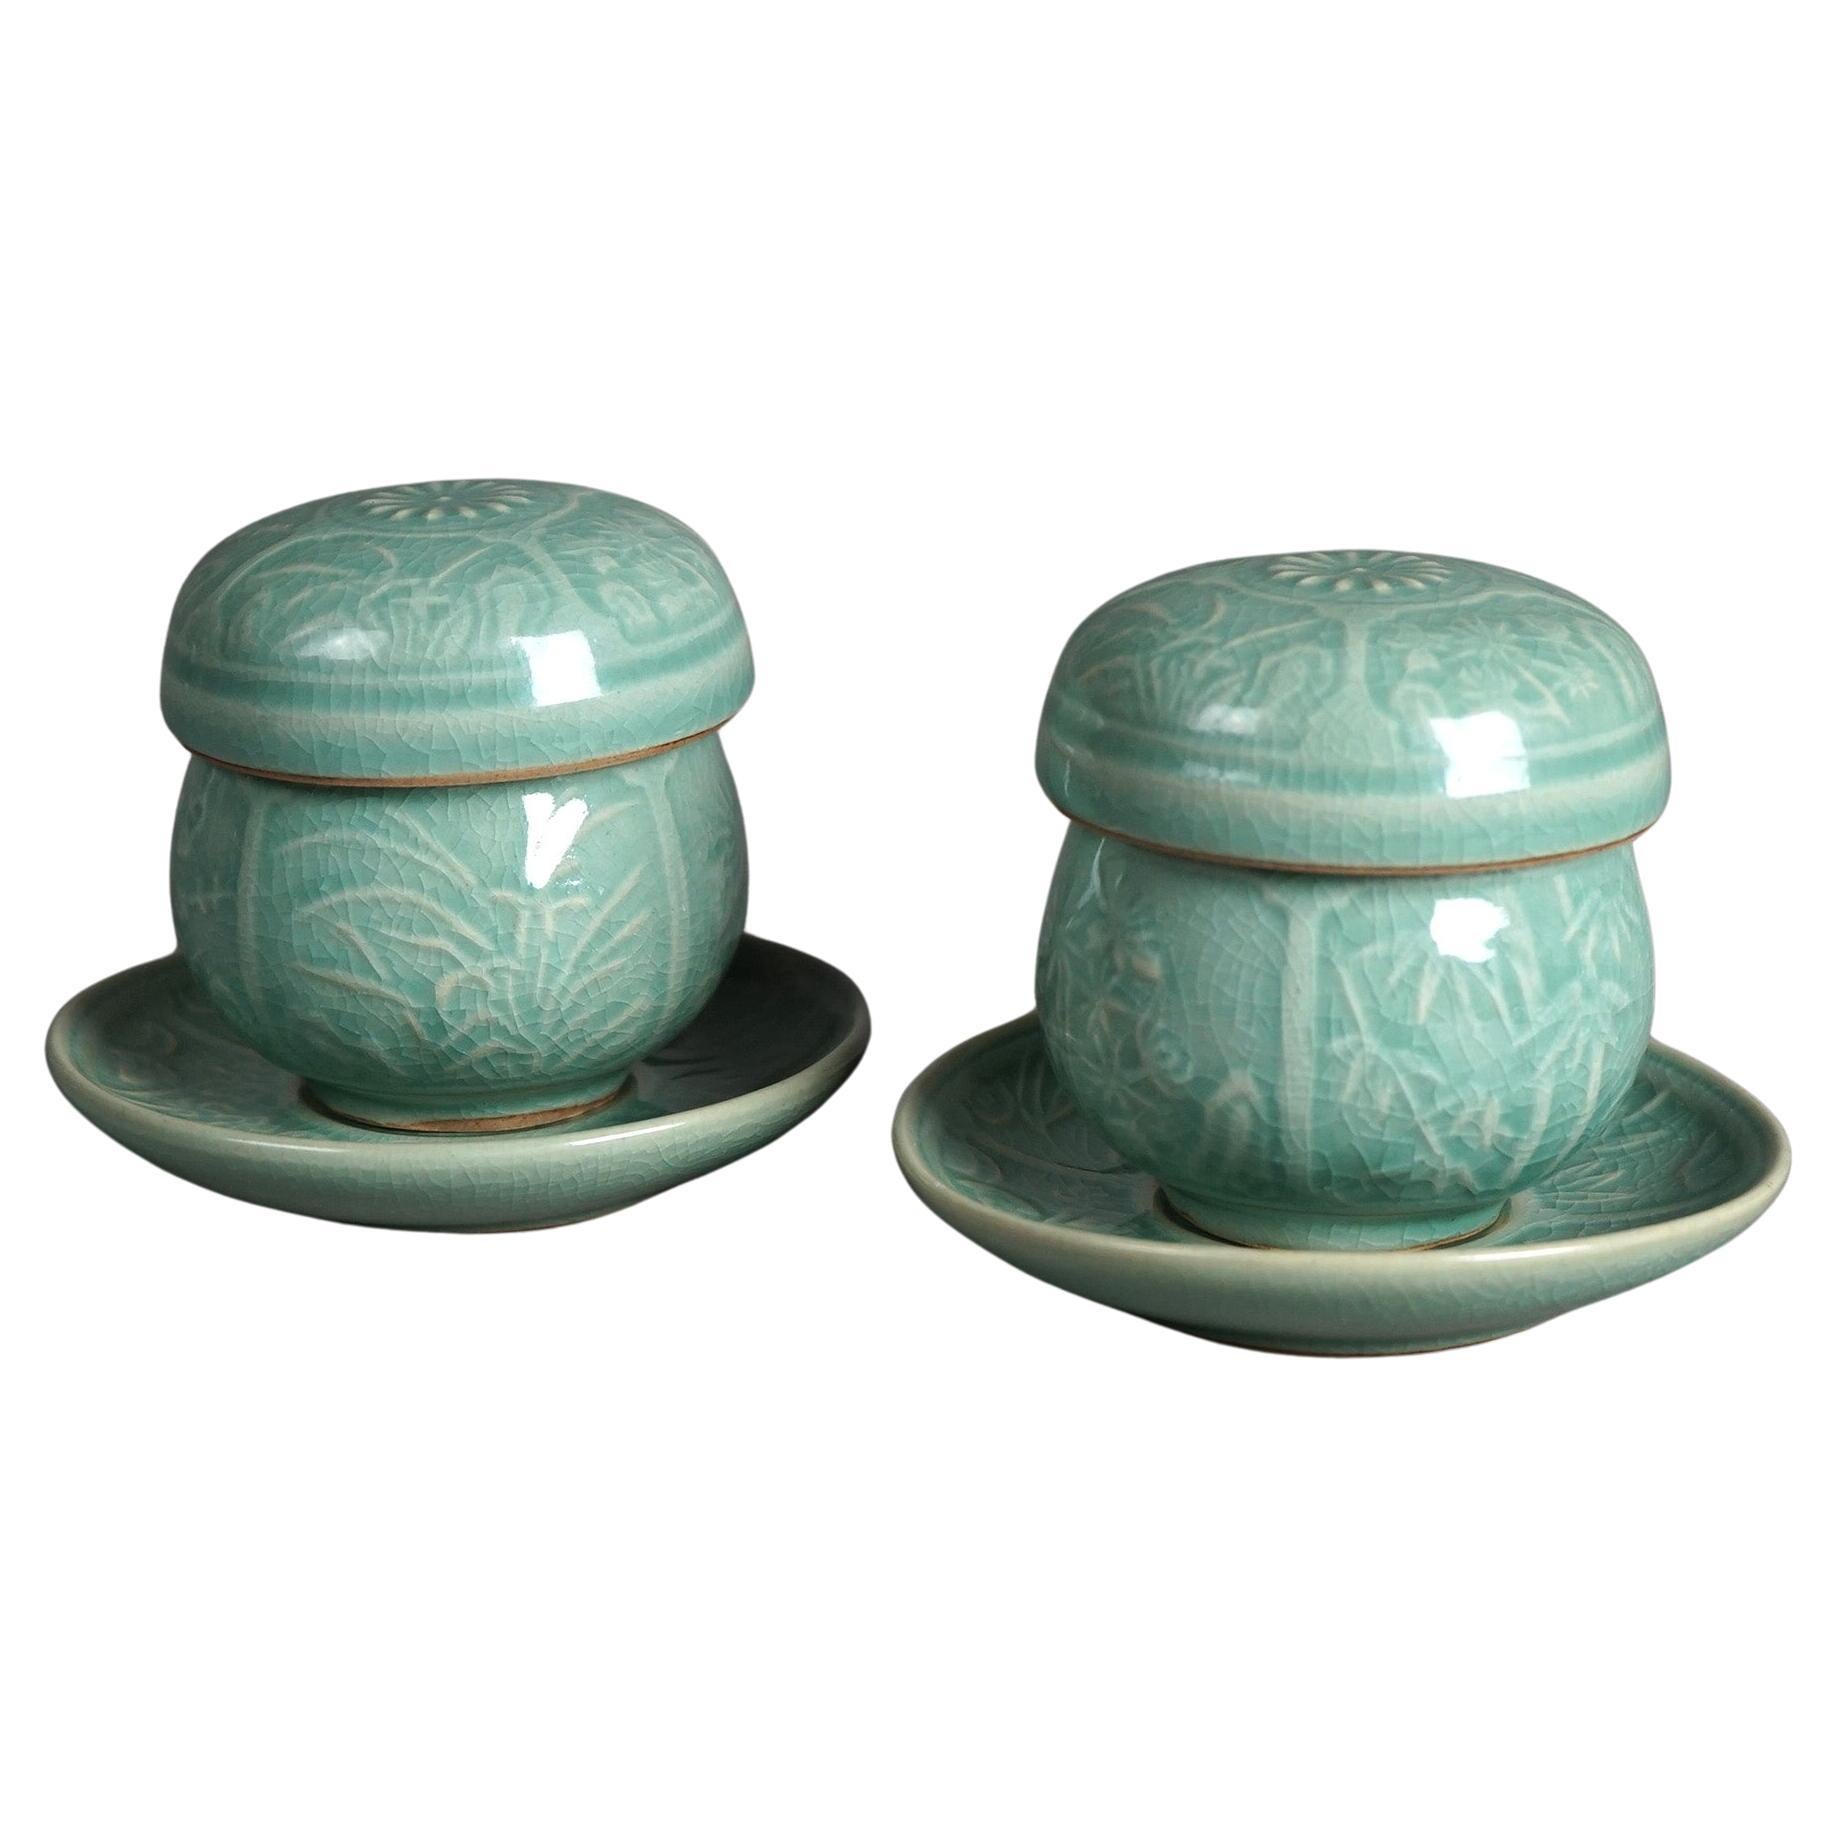 Pair of Antique Chinese Celadon Stamped Teacups with Inserts C1930